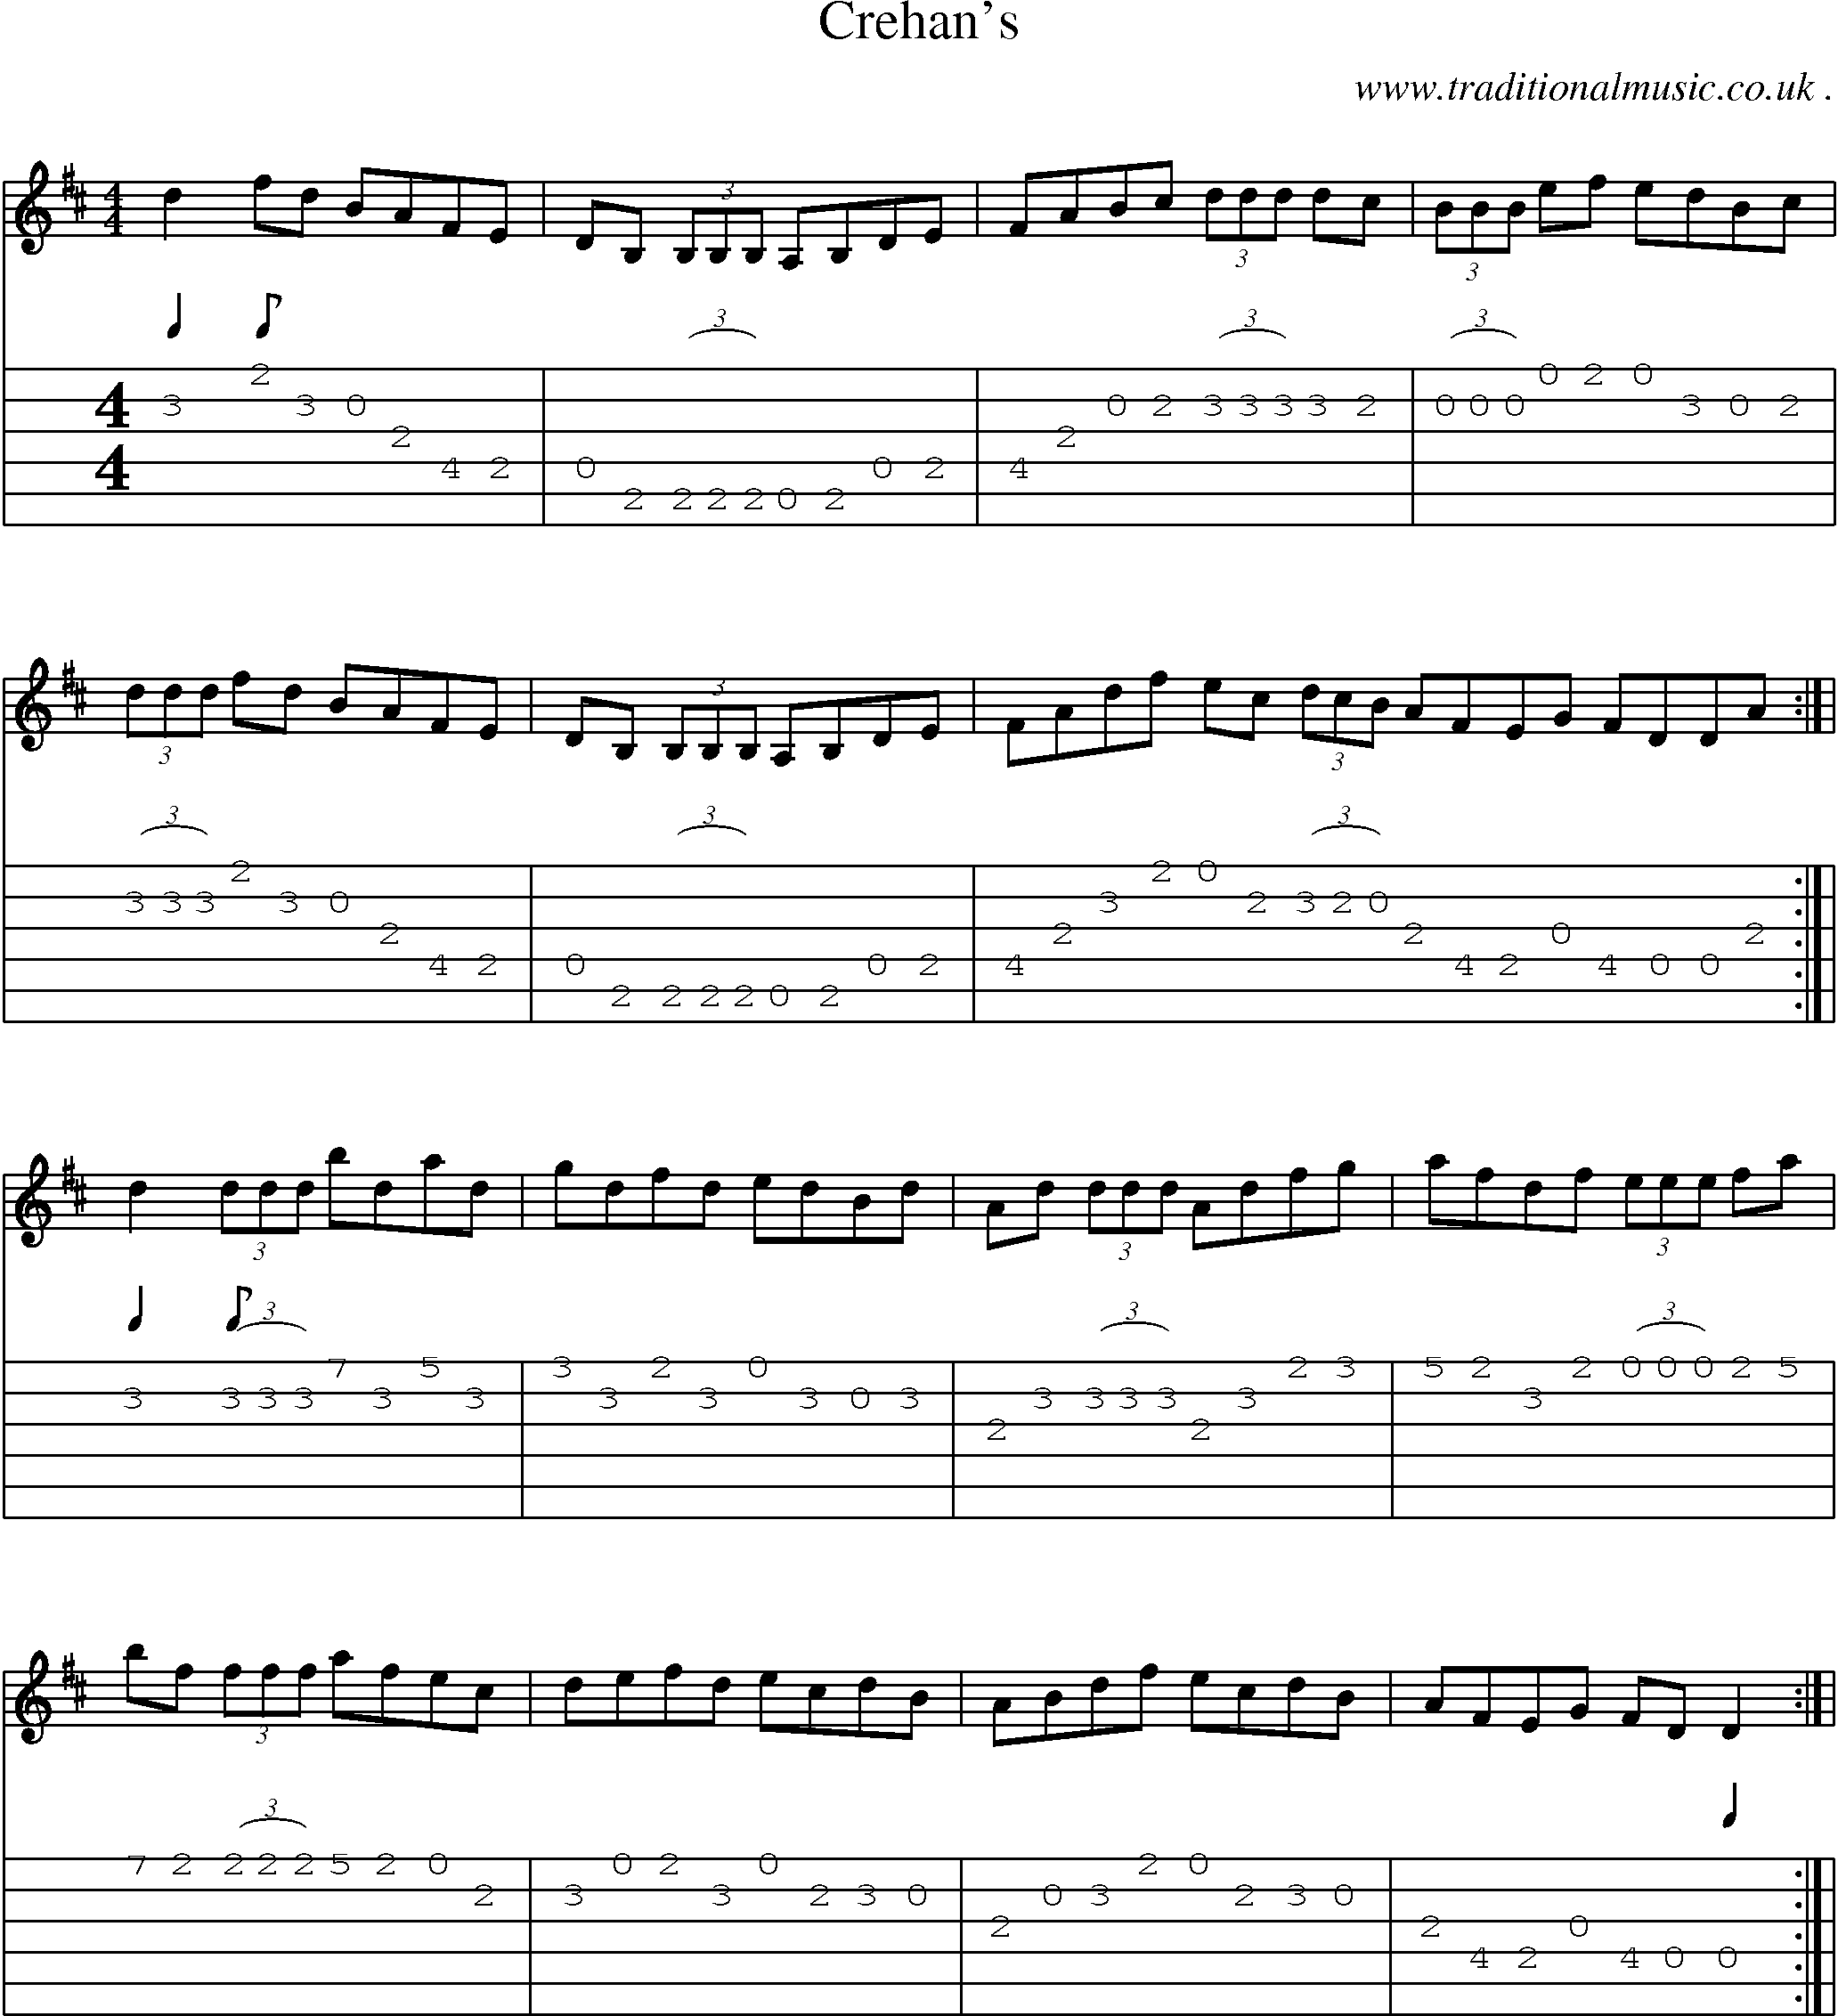 Sheet-Music and Guitar Tabs for Crehans